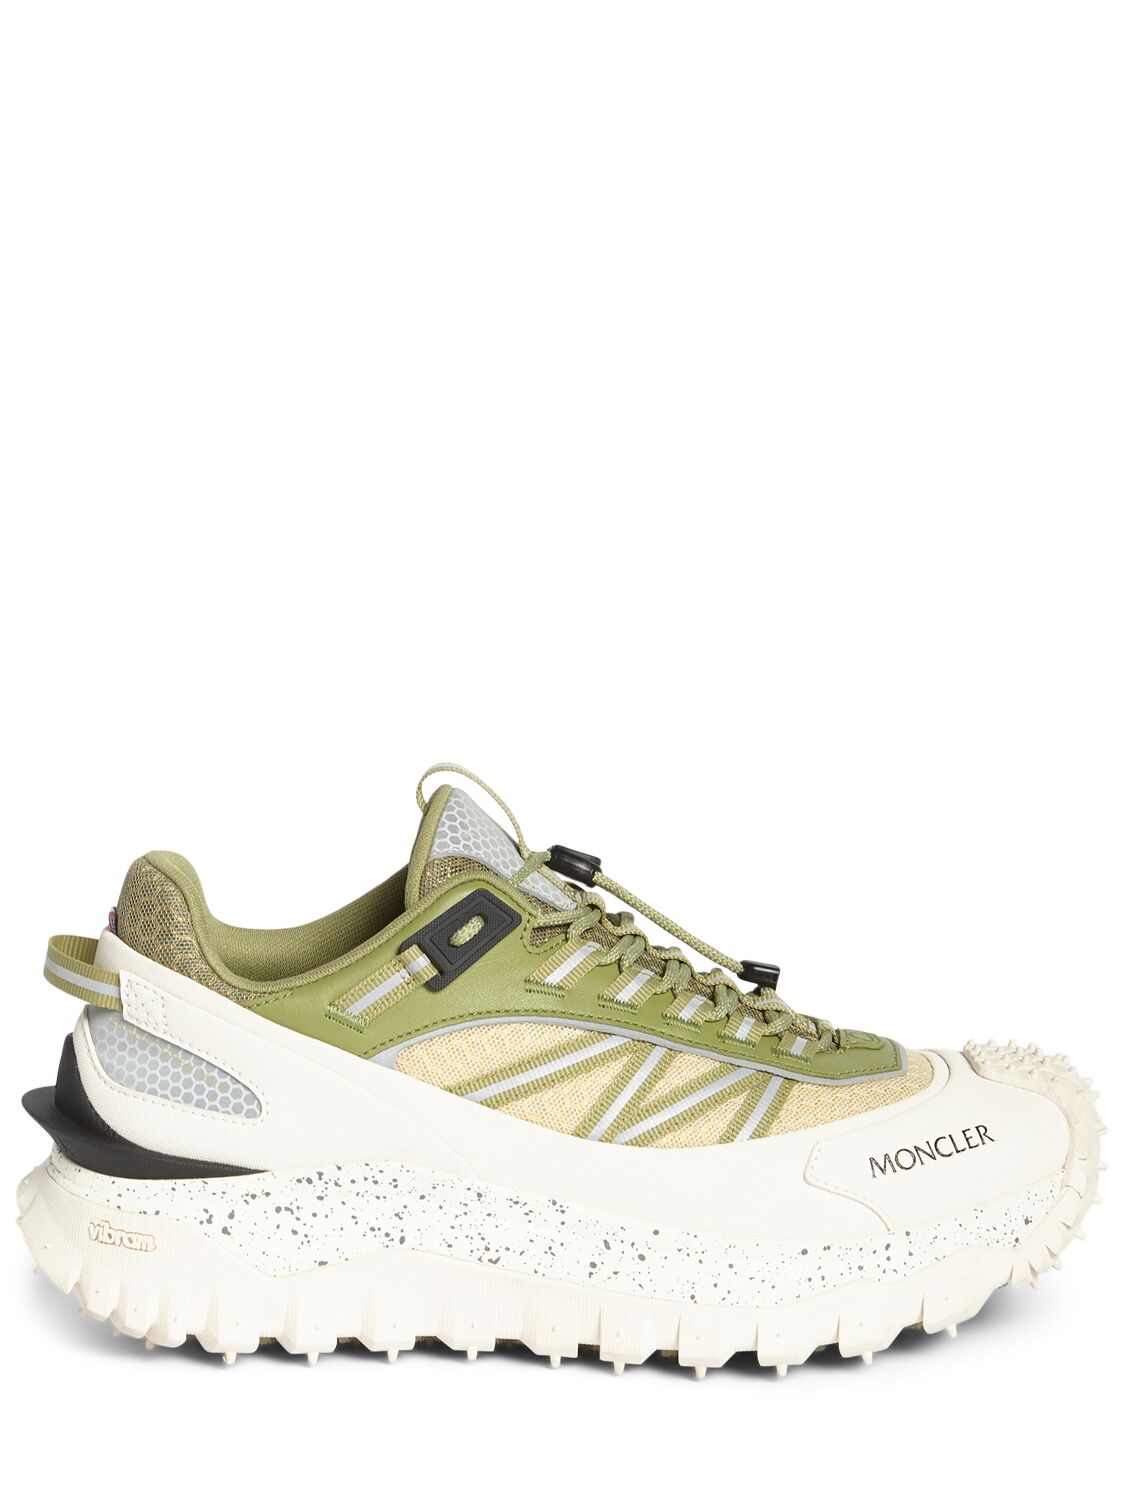 Moncler 4.5cm Trailgrip Tech Sneakers In White,green